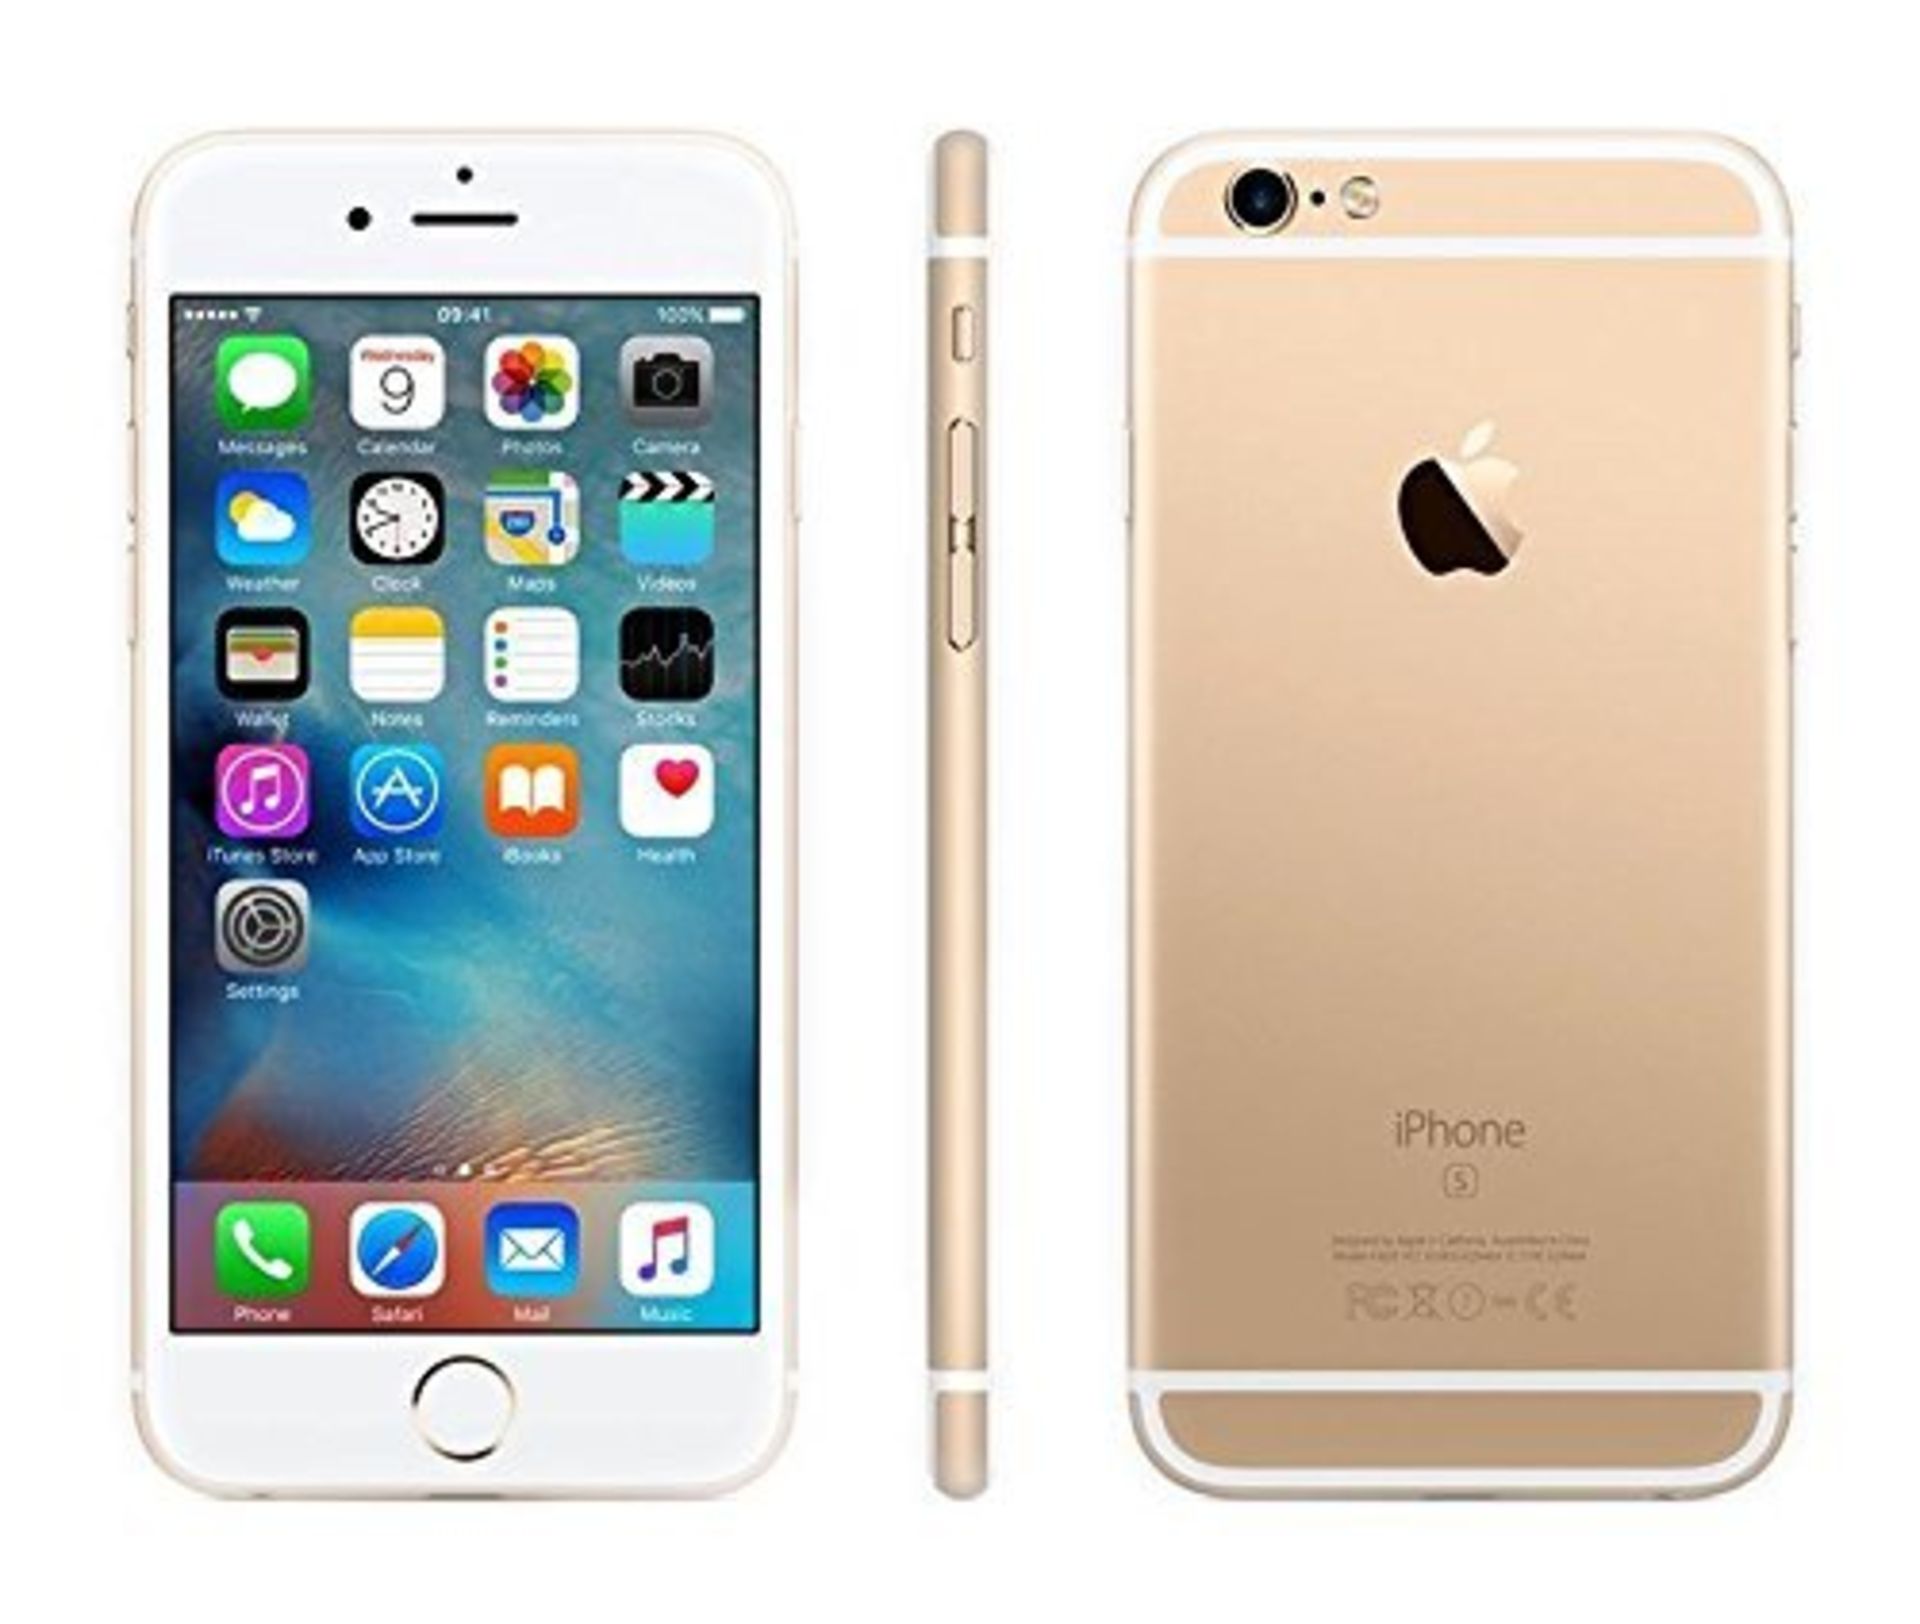 Grade A Apple iphone 6s plus 16GB Colours May Vary Touch ID Item available approx 10 working days